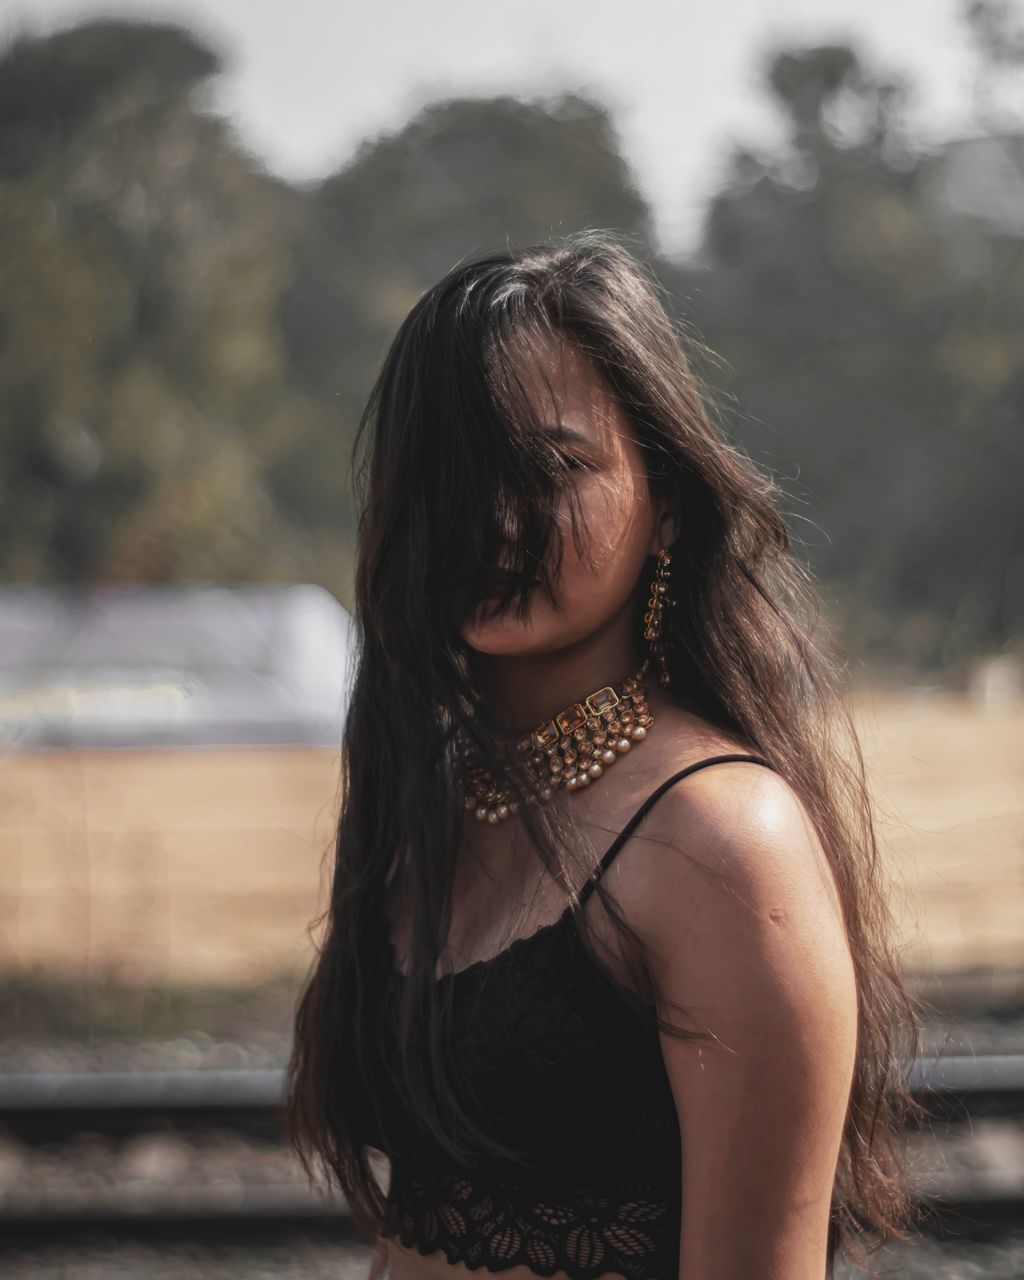 female, one person, long hair, hairstyle, women, adult, portrait, photo shoot, portrait photography, young adult, dress, brown hair, black, nature, fashion, person, clothing, waist up, focus on foreground, outdoors, standing, skin, land, teenager, human hair, day, jewelry, lifestyles, sky, necklace, emotion, spring, looking